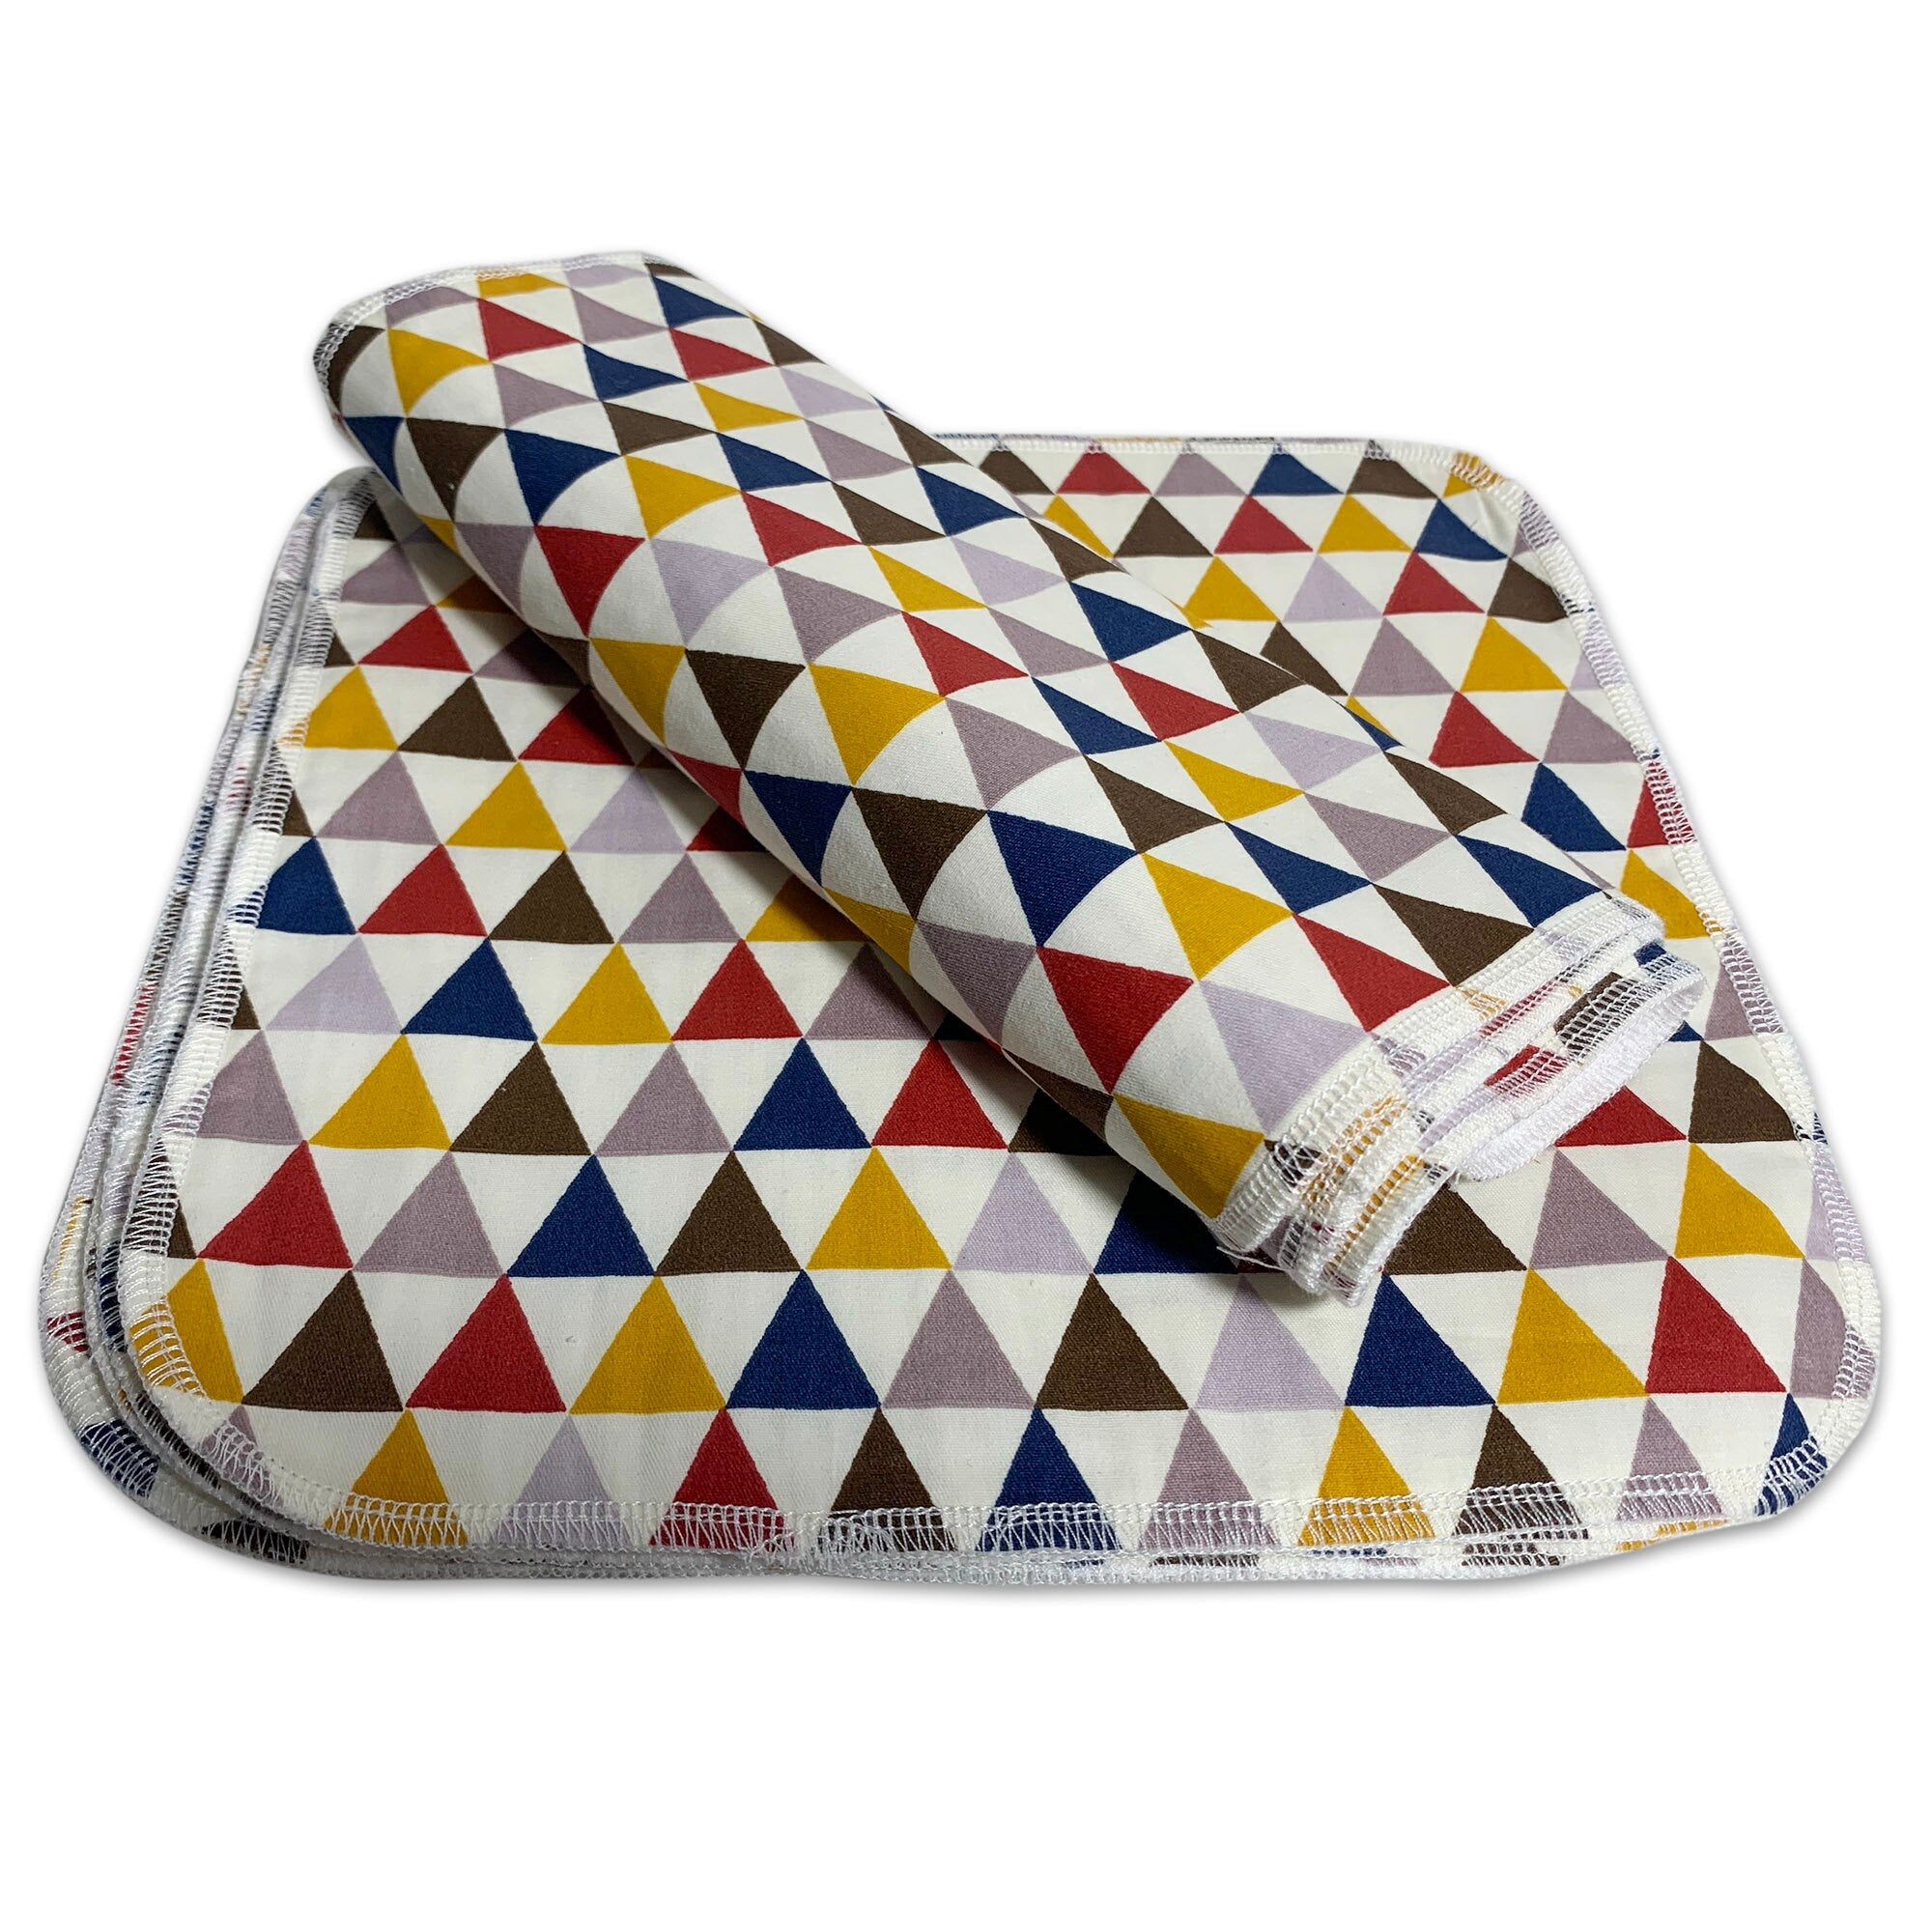 Multi-use Soft Reusable paper towel, Paperless kitchen towels，Printed Fabric with Triple Gauze Cloth Towels , Set of 12 - Colorful Triangles